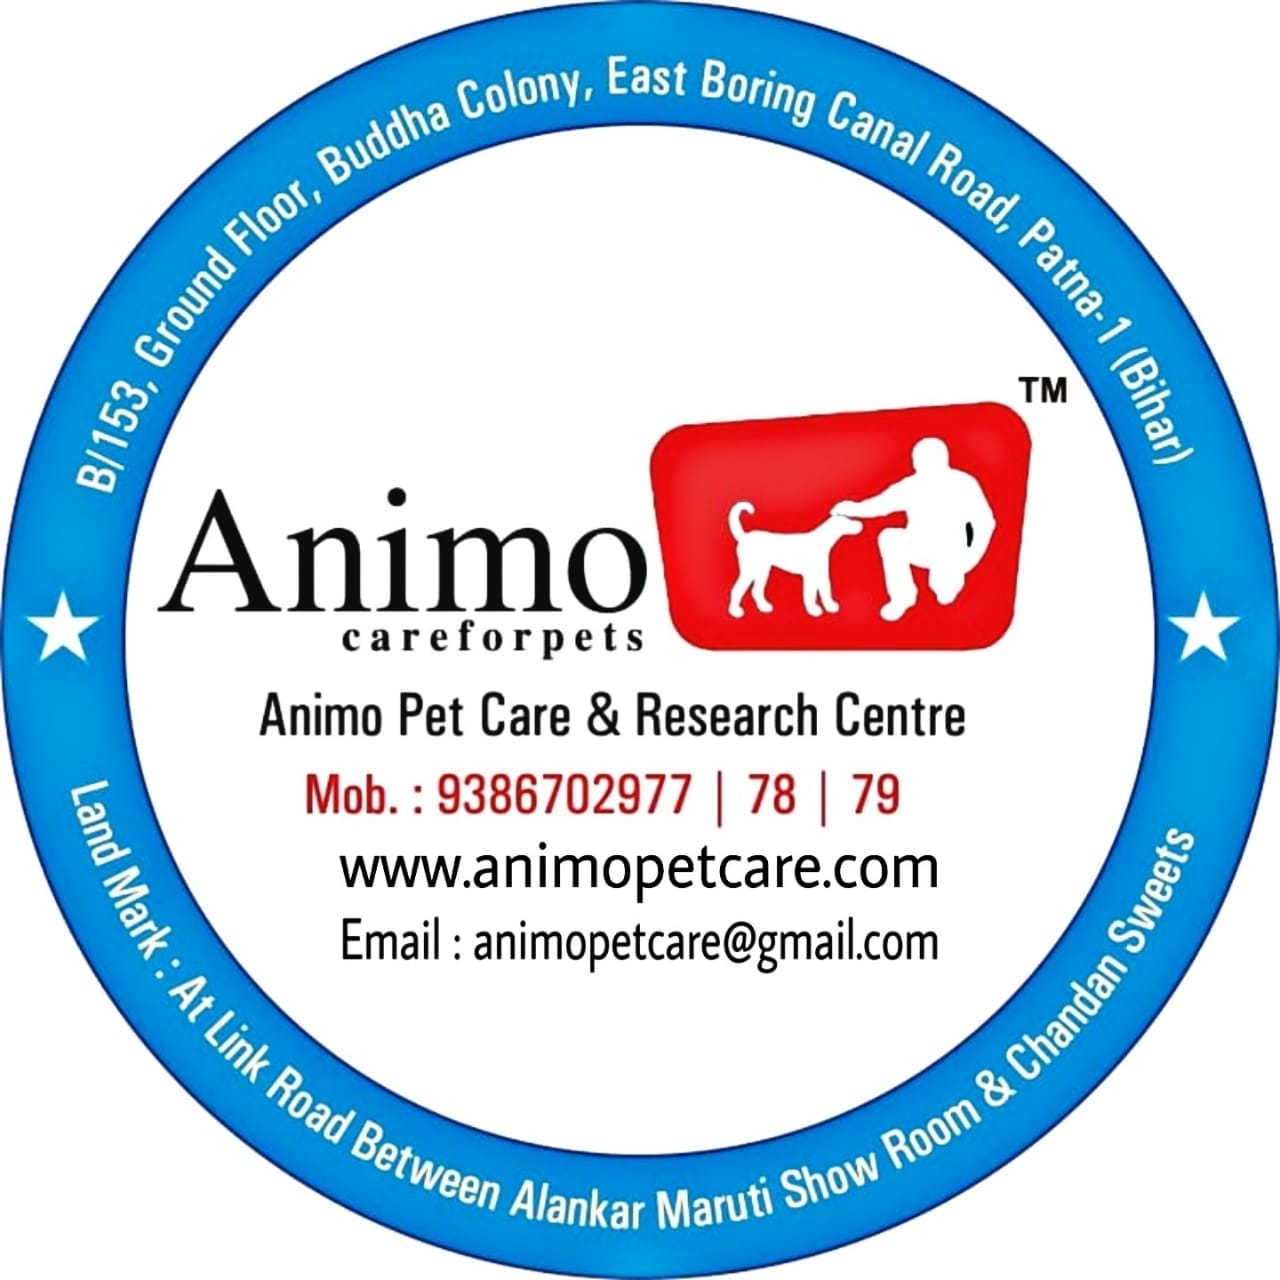 Animo Pet Care|Hospitals|Medical Services